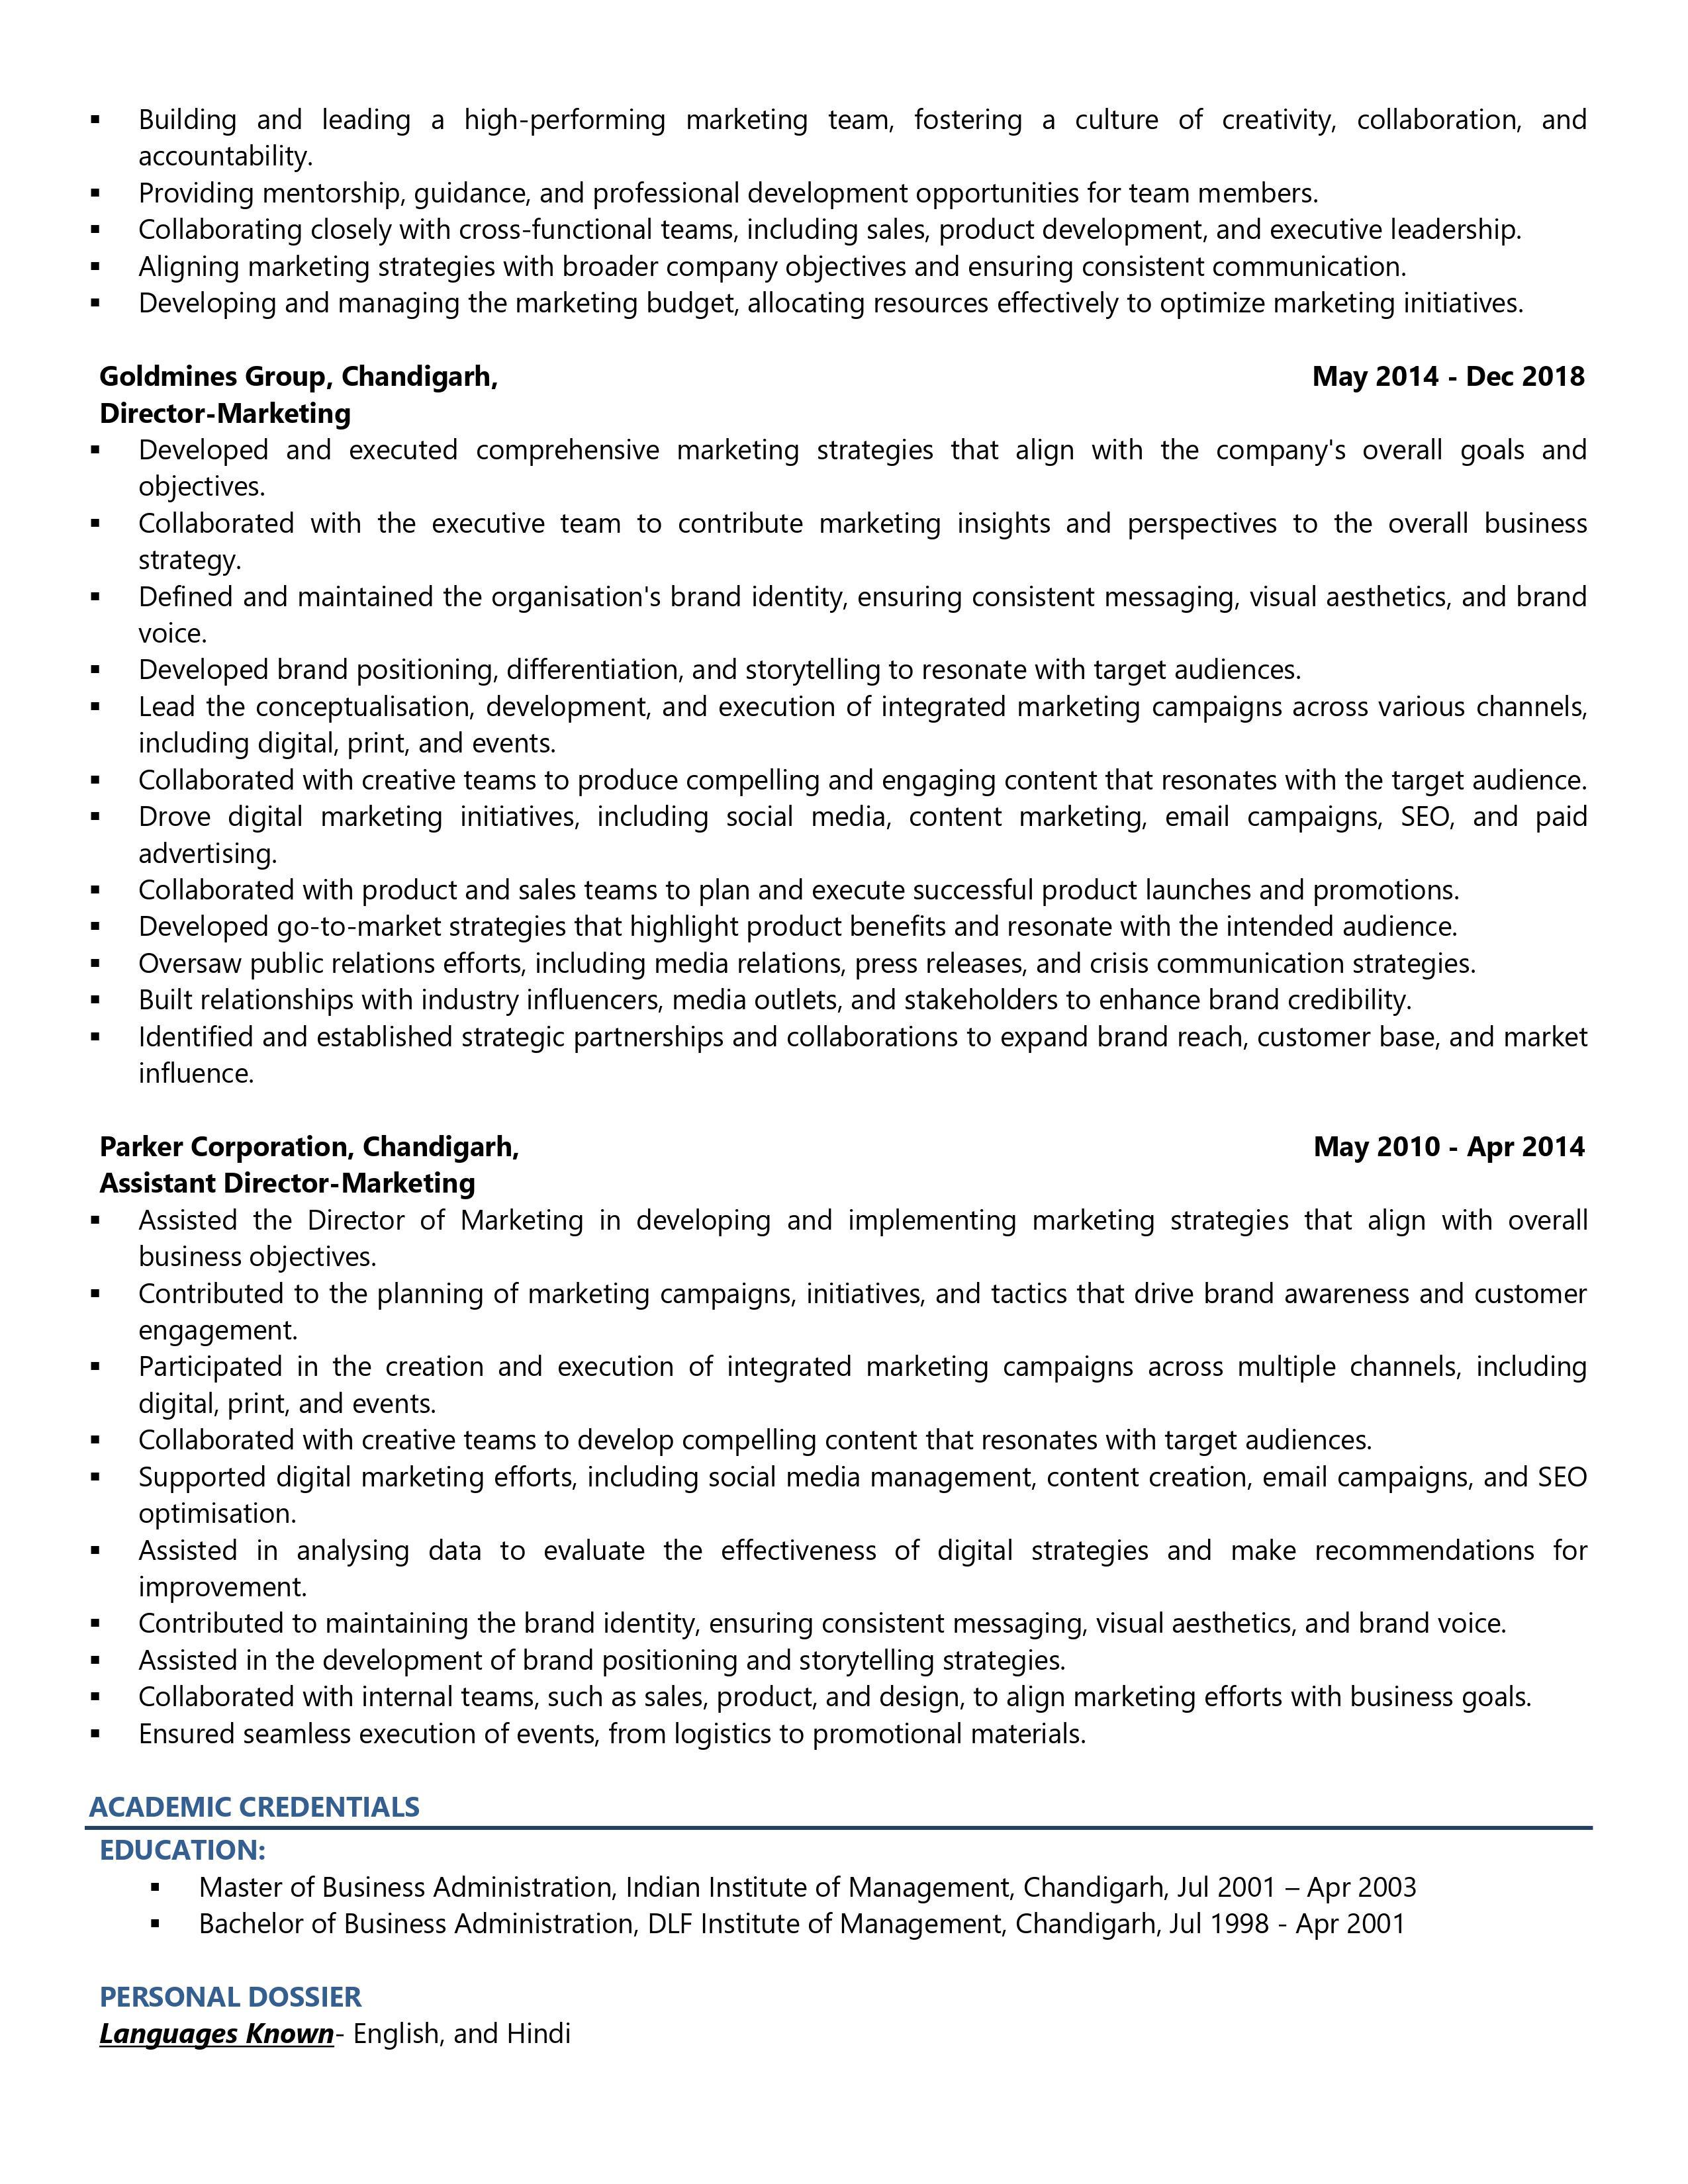 Chief Marketing Officer (CMO) - Resume Example & Template